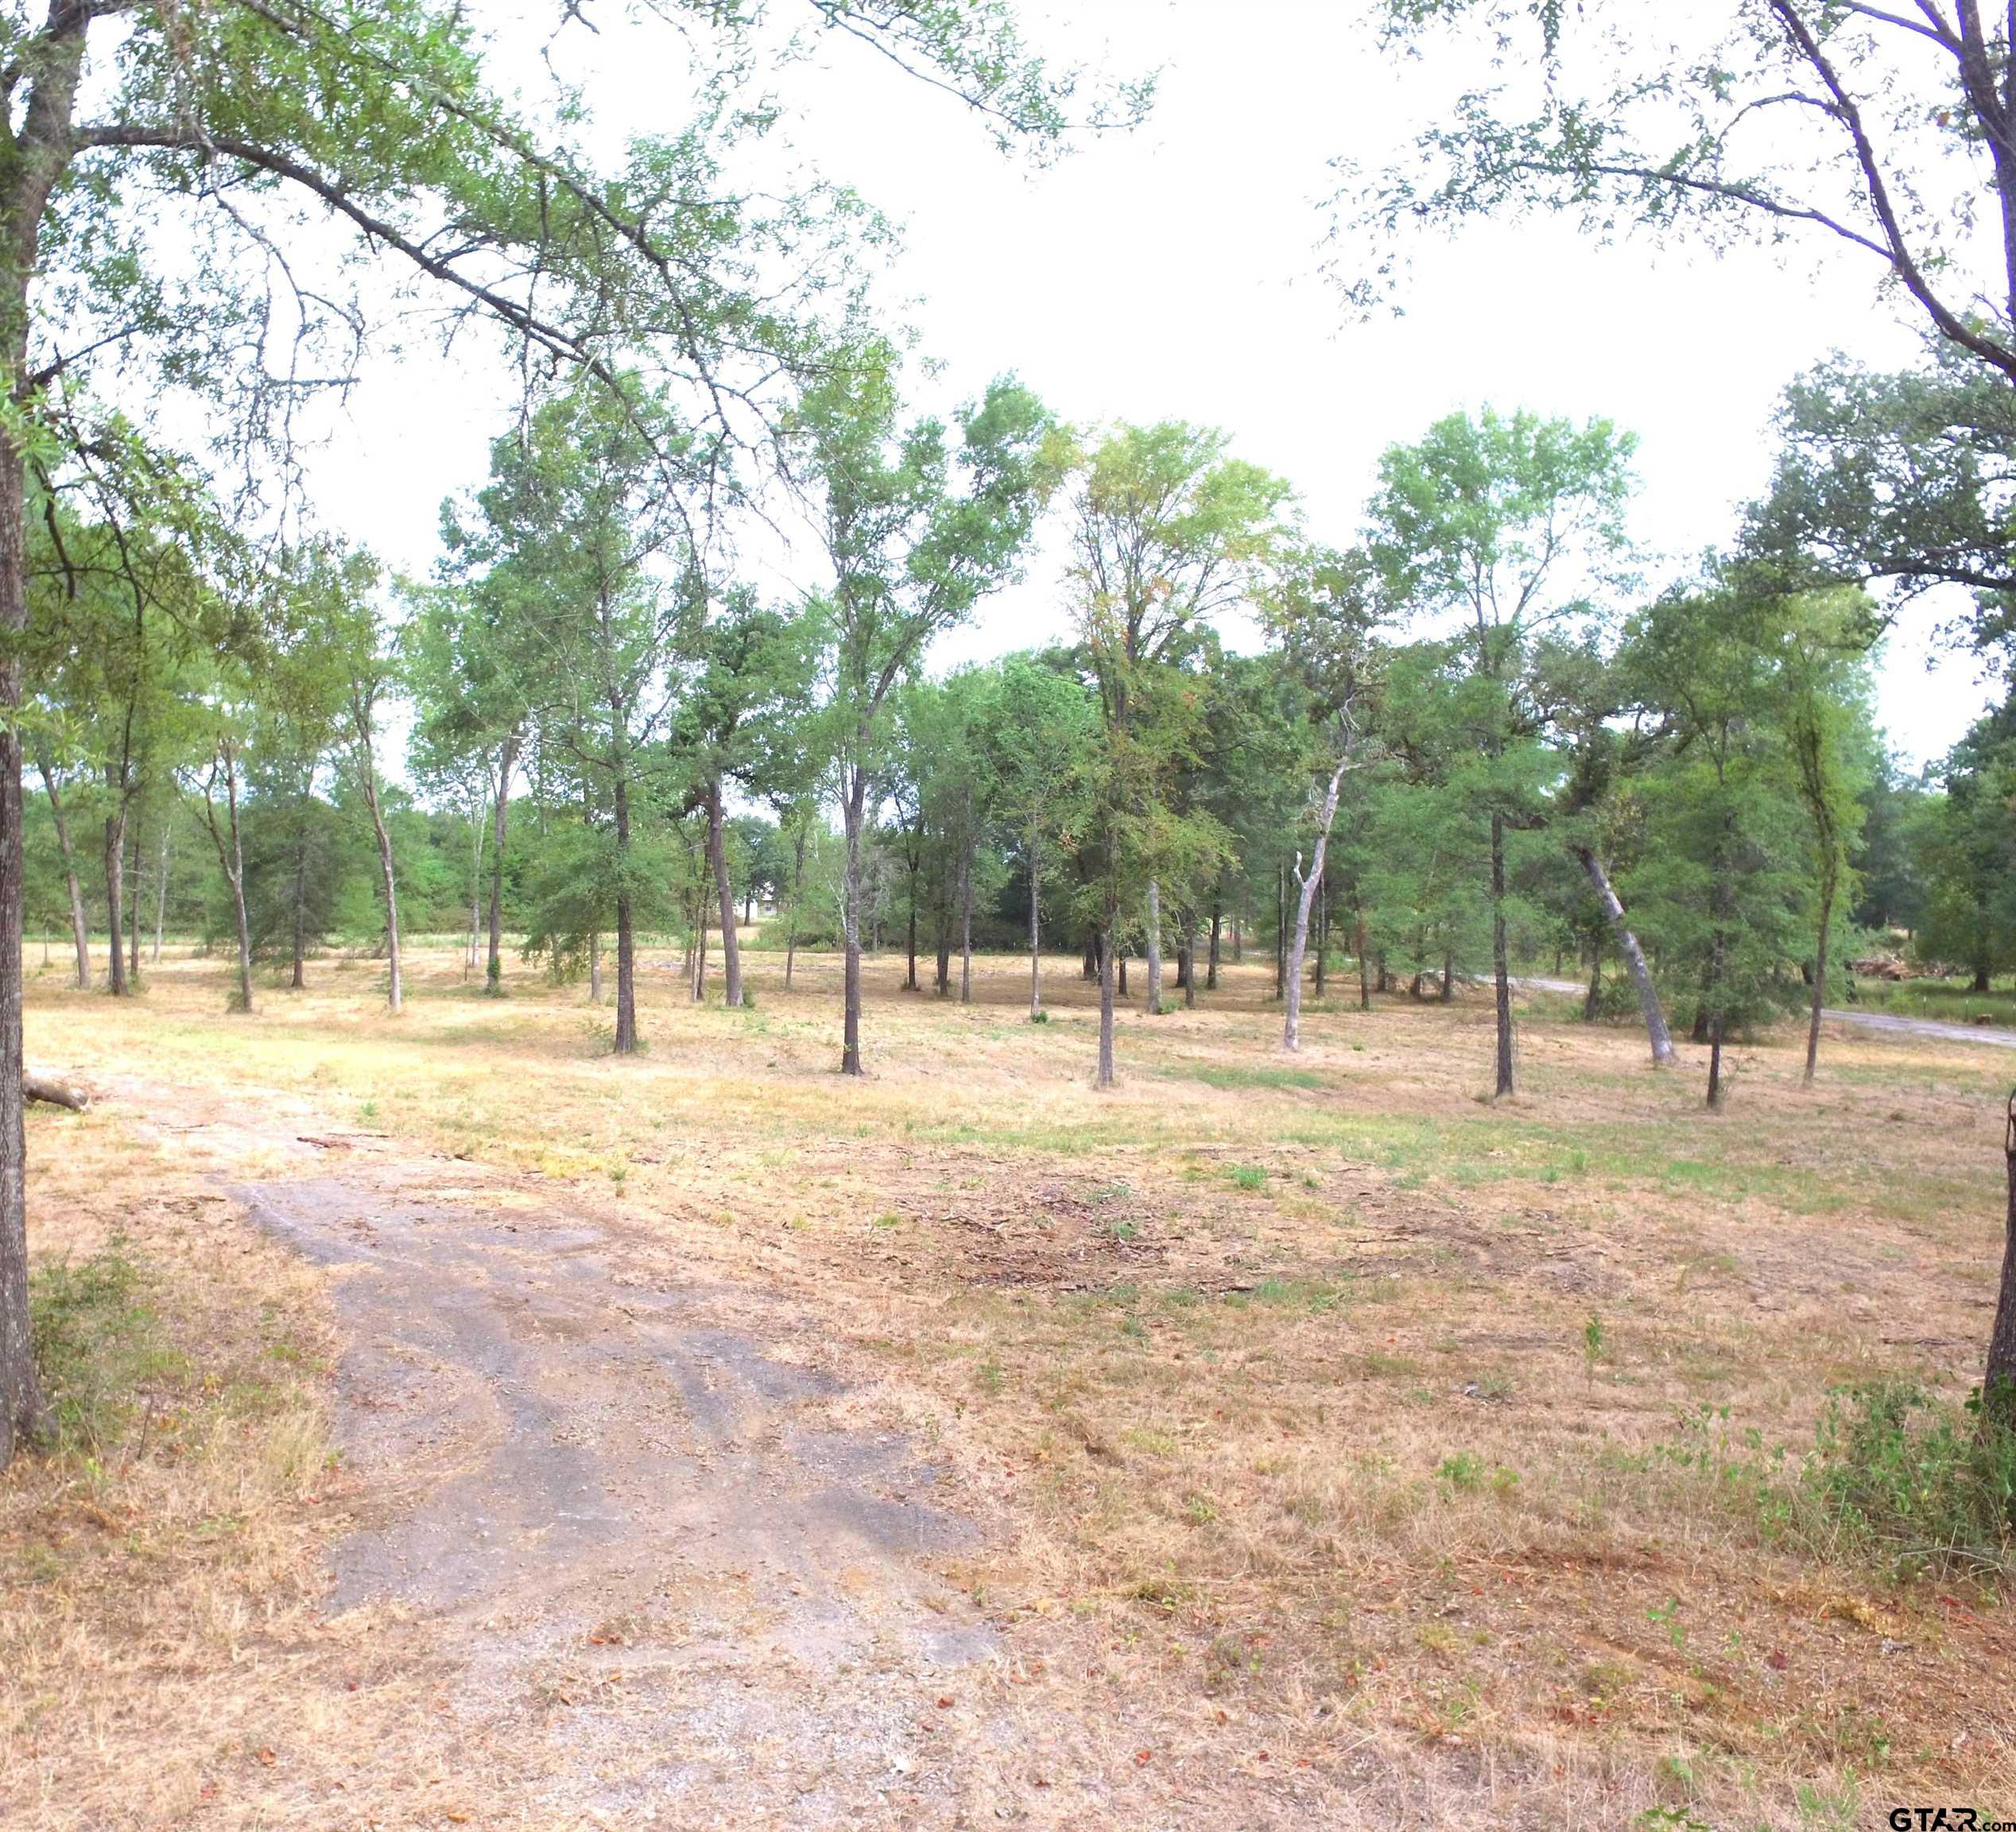 a view of open space with trees